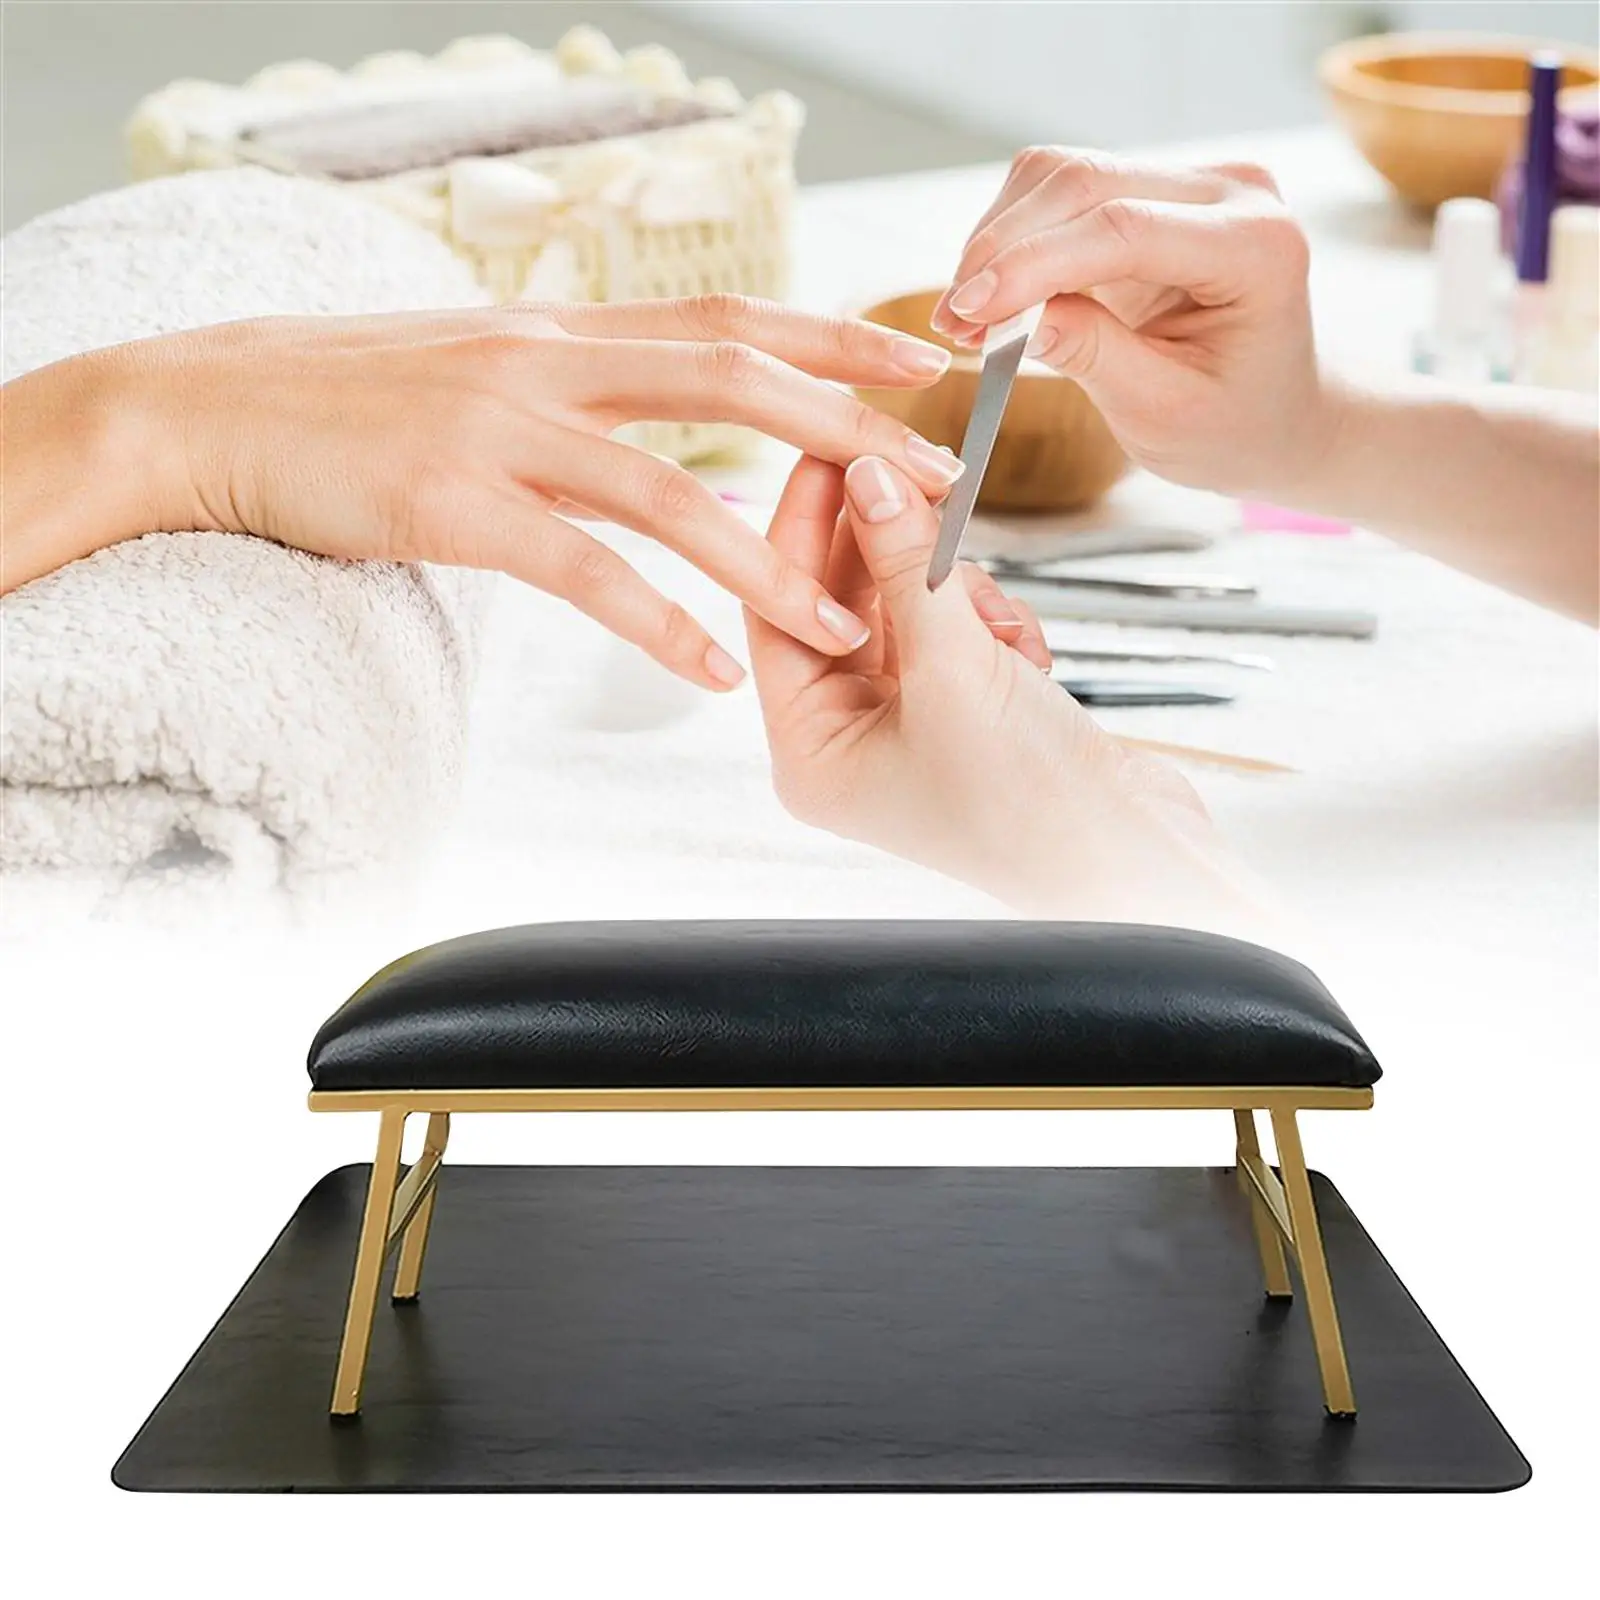 Nail Hand Pillow and Mat, Nail Table Mat Soft Non Slip Nail Hand Rest Manicure Tool, for Manicurist Nail Techs Use Nail Art